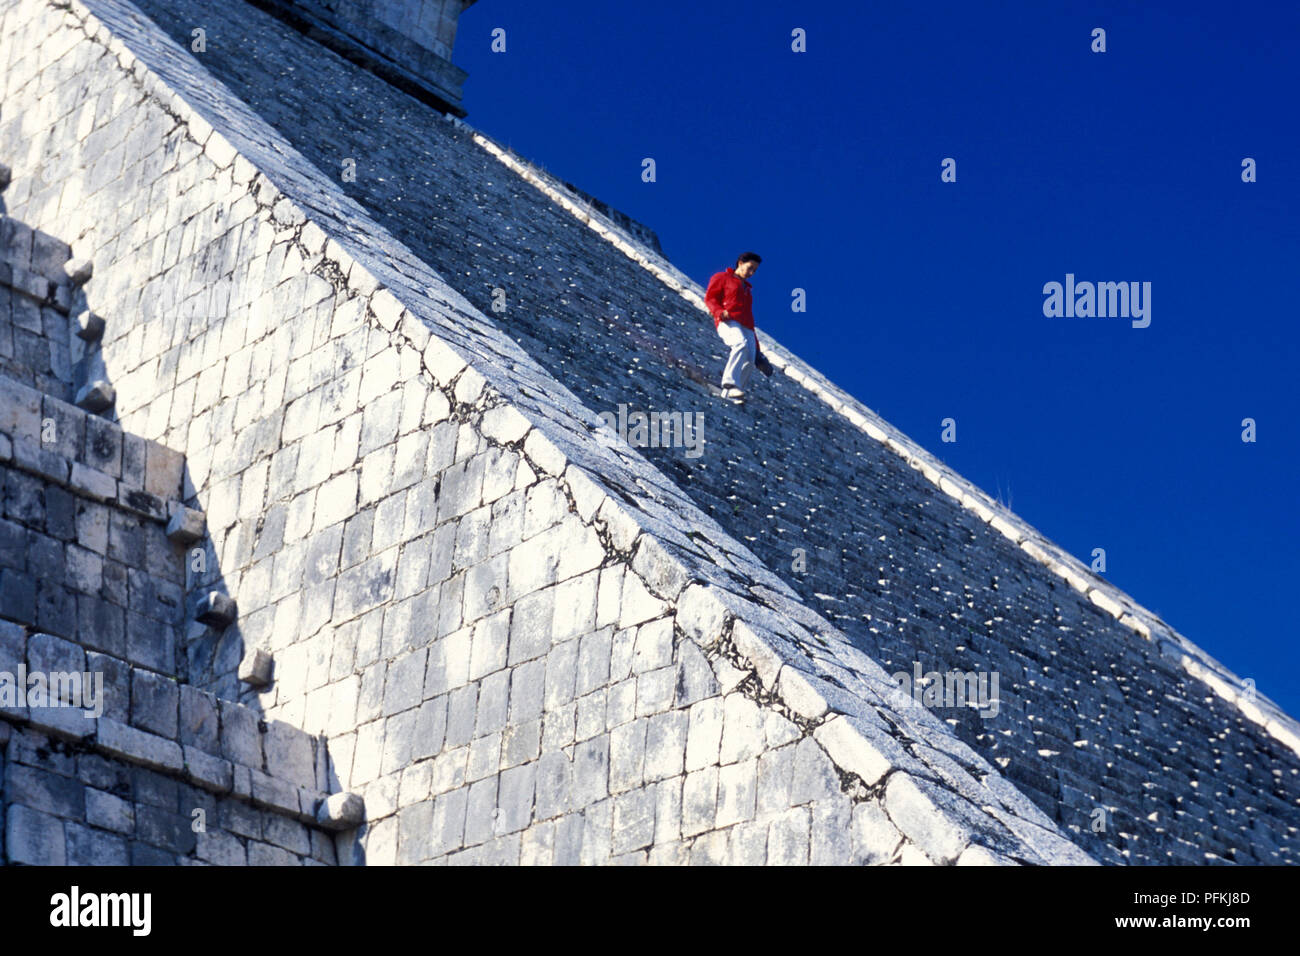 The Maya Ruins with the Kukulkan Pyramide of Chichen Itza in the Province Yucatan in Mexico in Central America.     Mexico, Chichen Itza, January 2009 Stock Photo